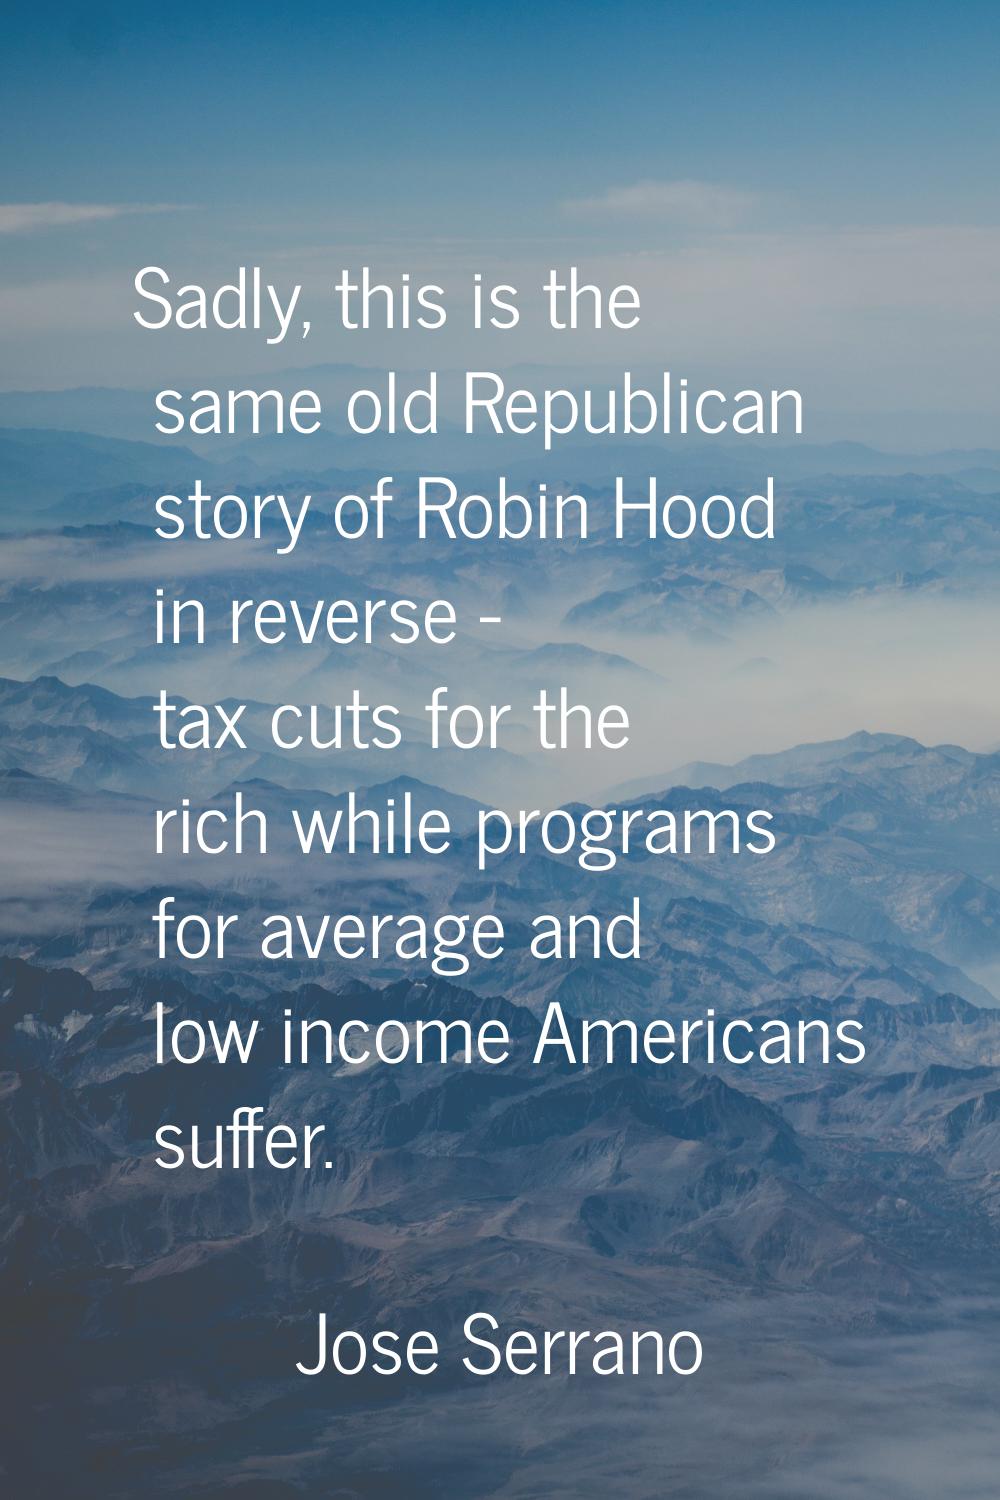 Sadly, this is the same old Republican story of Robin Hood in reverse - tax cuts for the rich while